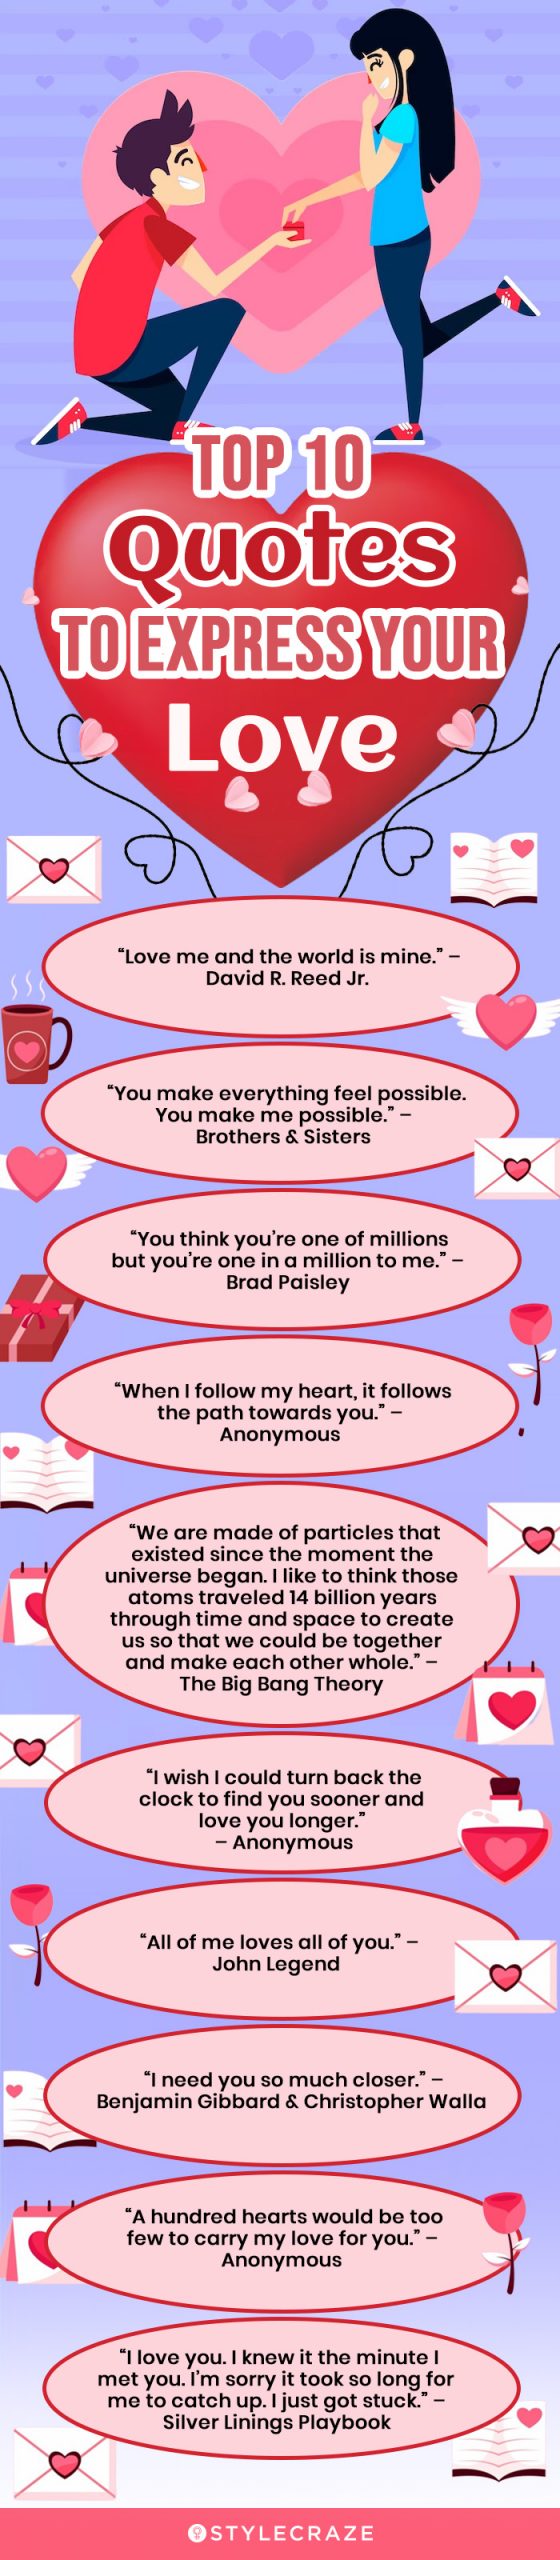 top 10 quotes to express your love (infographic)